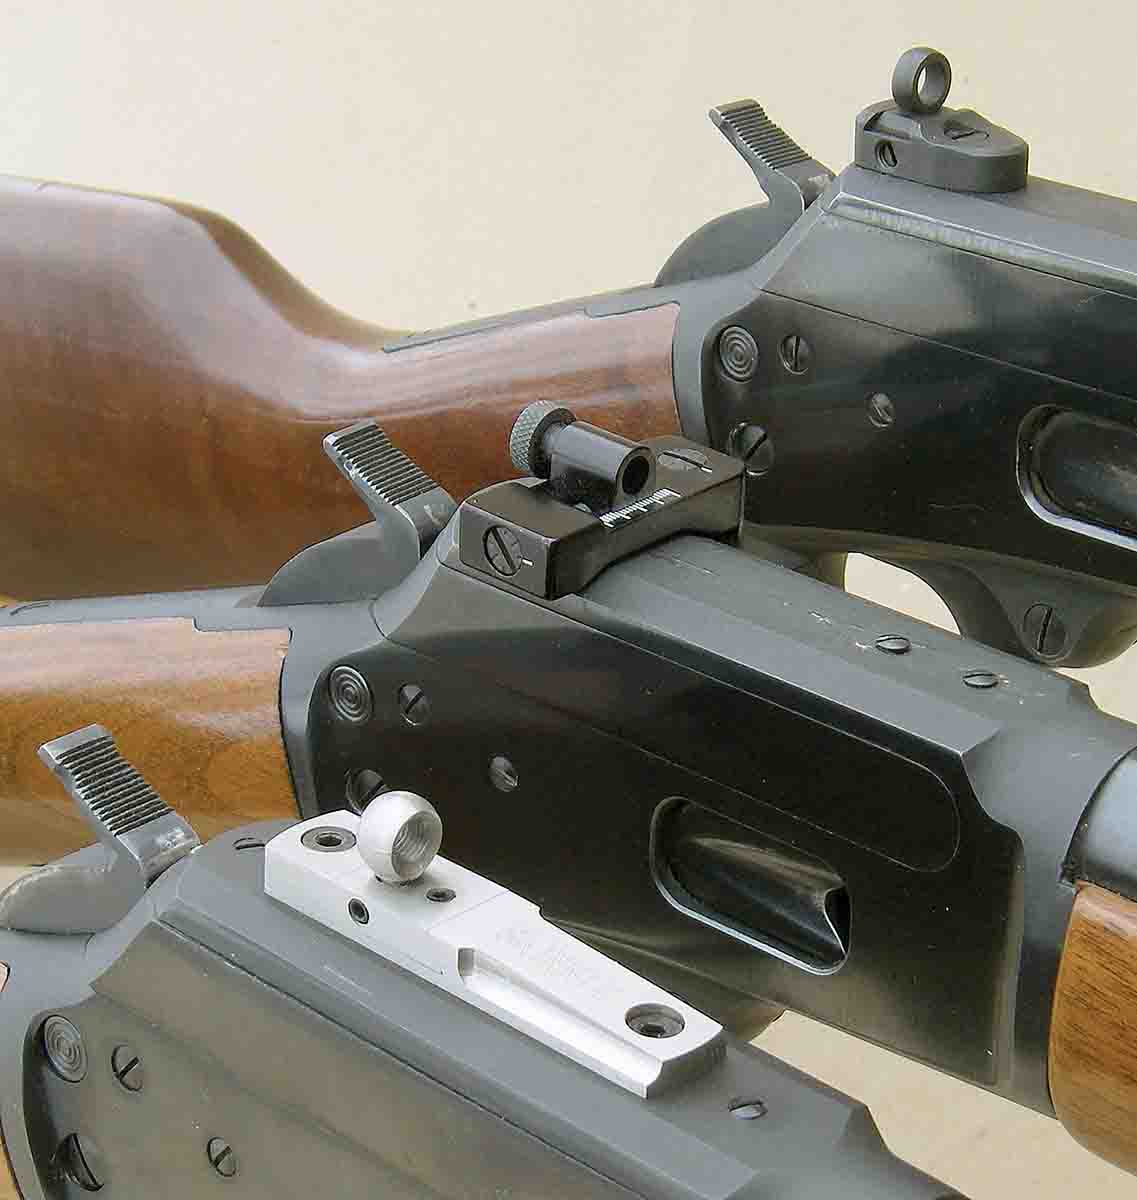 Aperture sights are excellent additions to a “hunting” levergun. Examples include (front to back): Skinner, Williams and X-S.